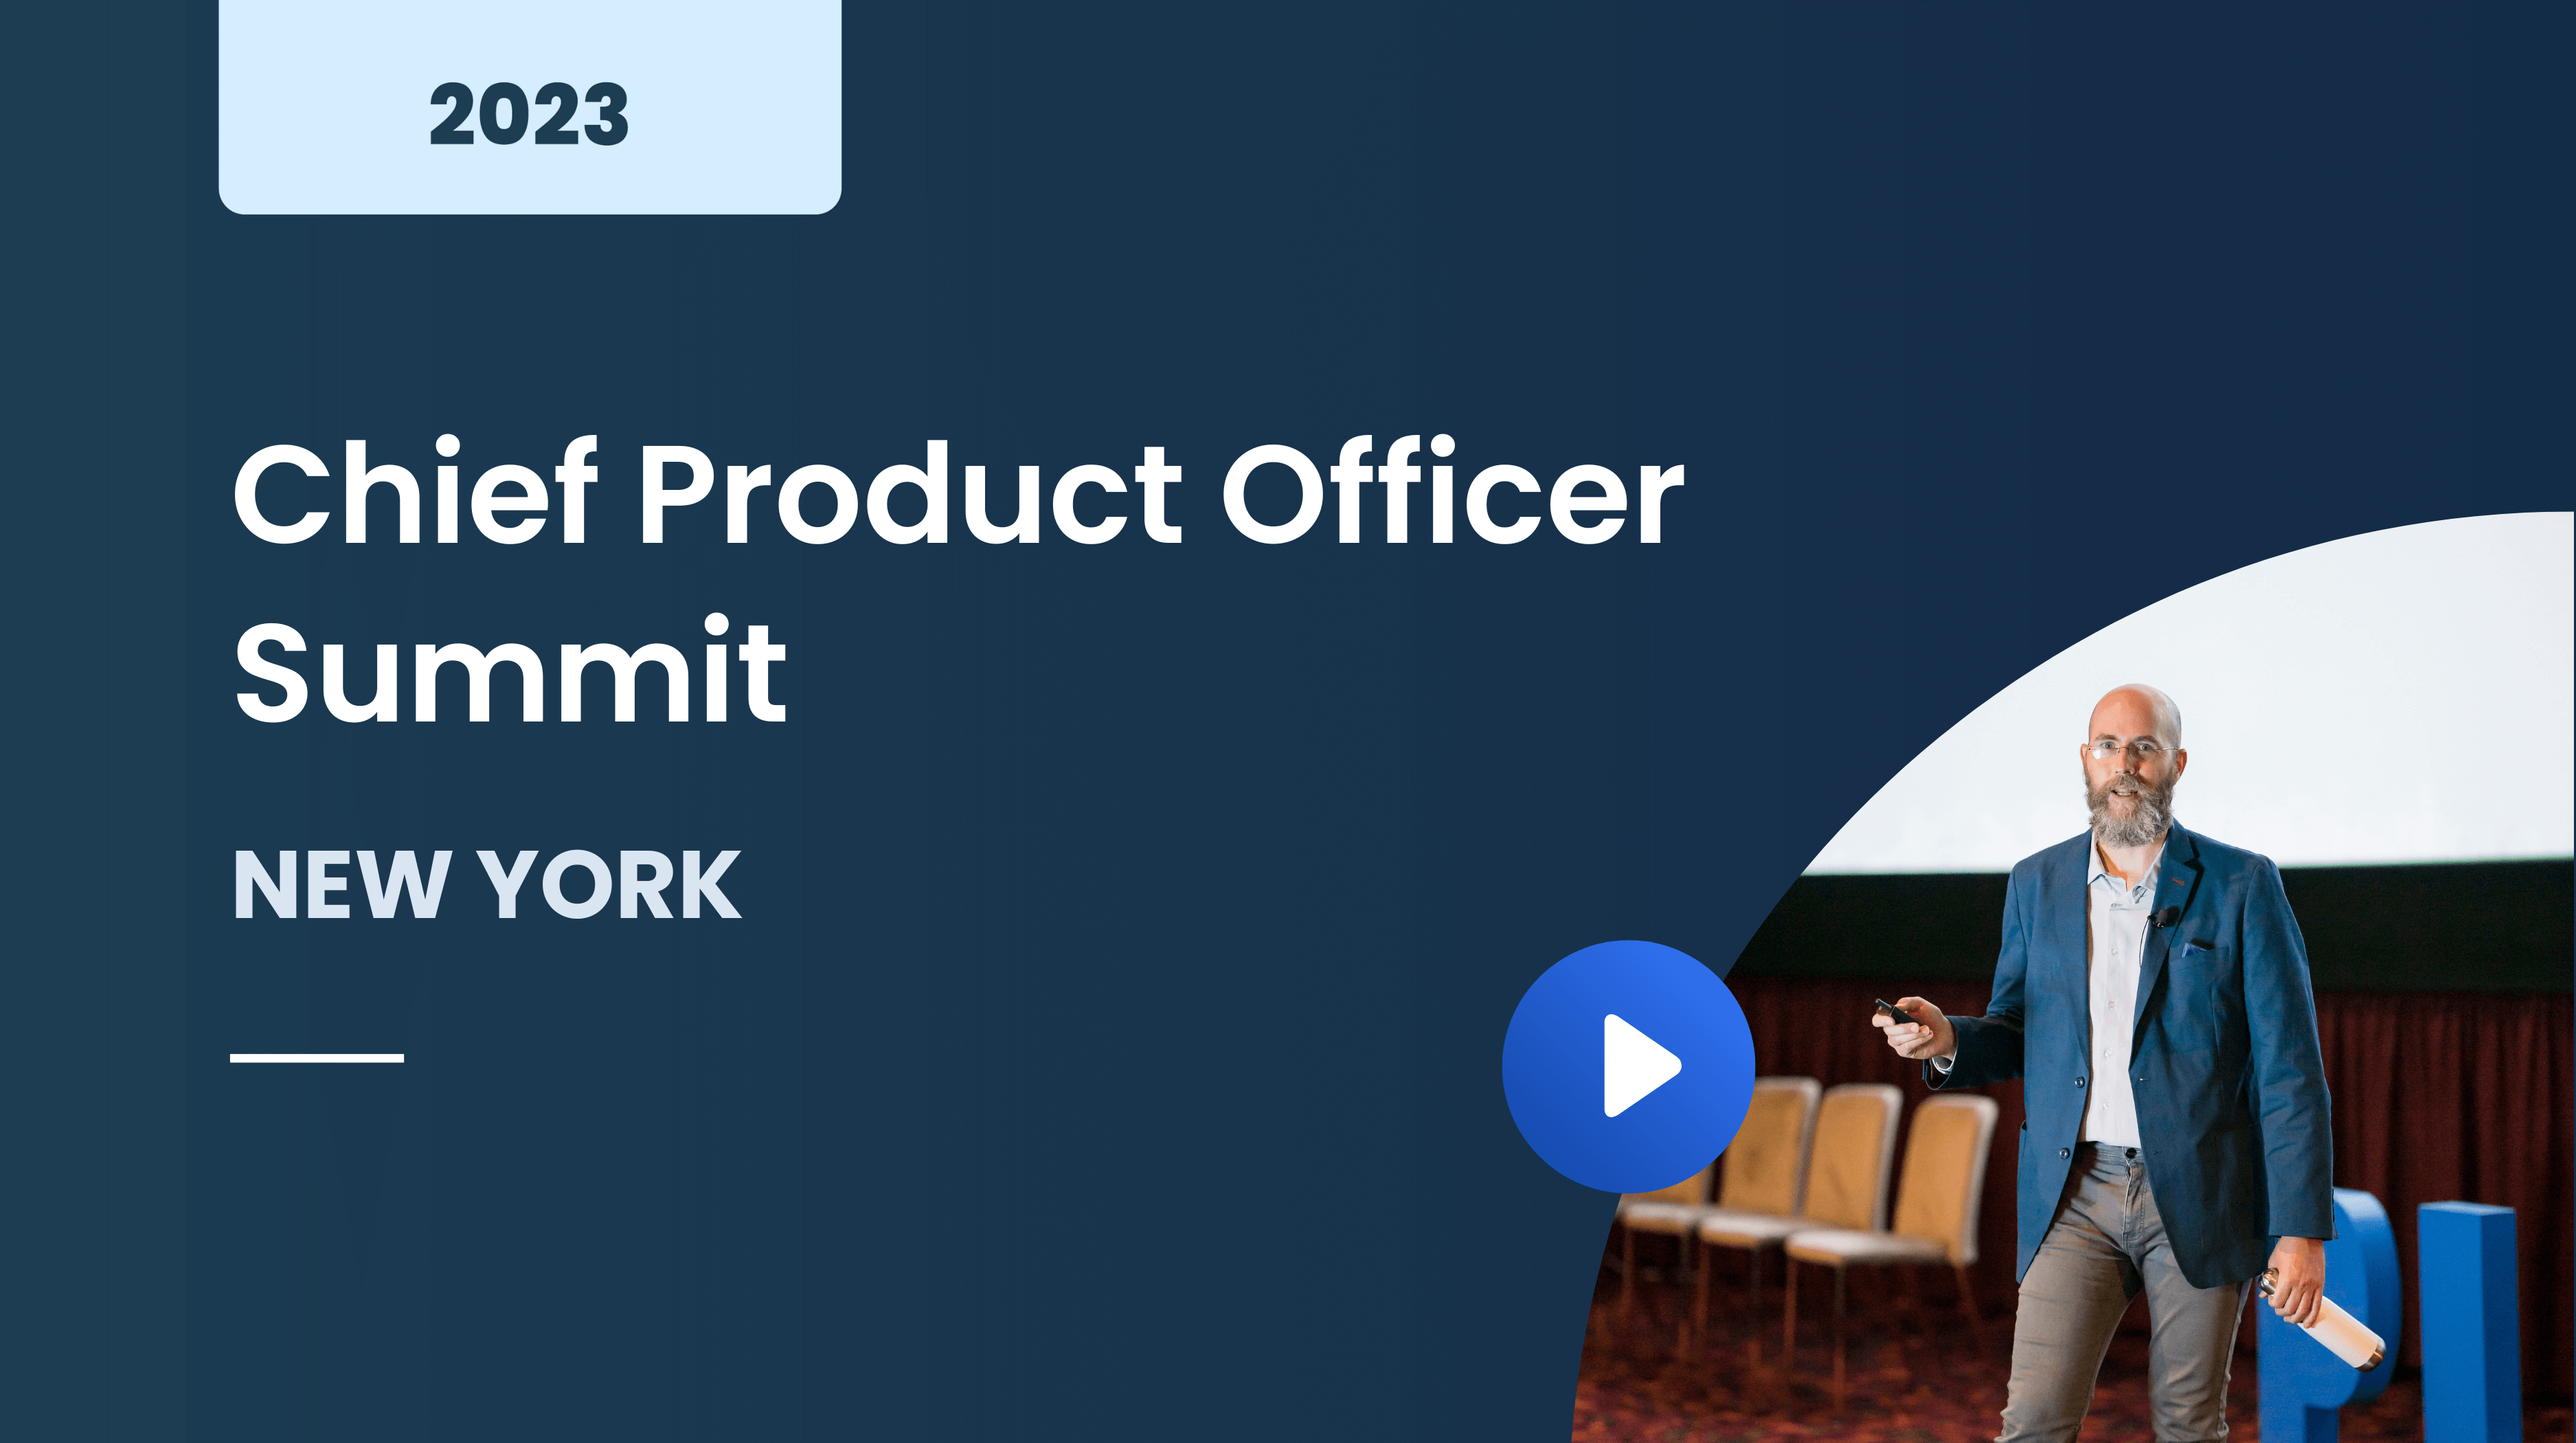 Chief Product Officer Summit New York 2023